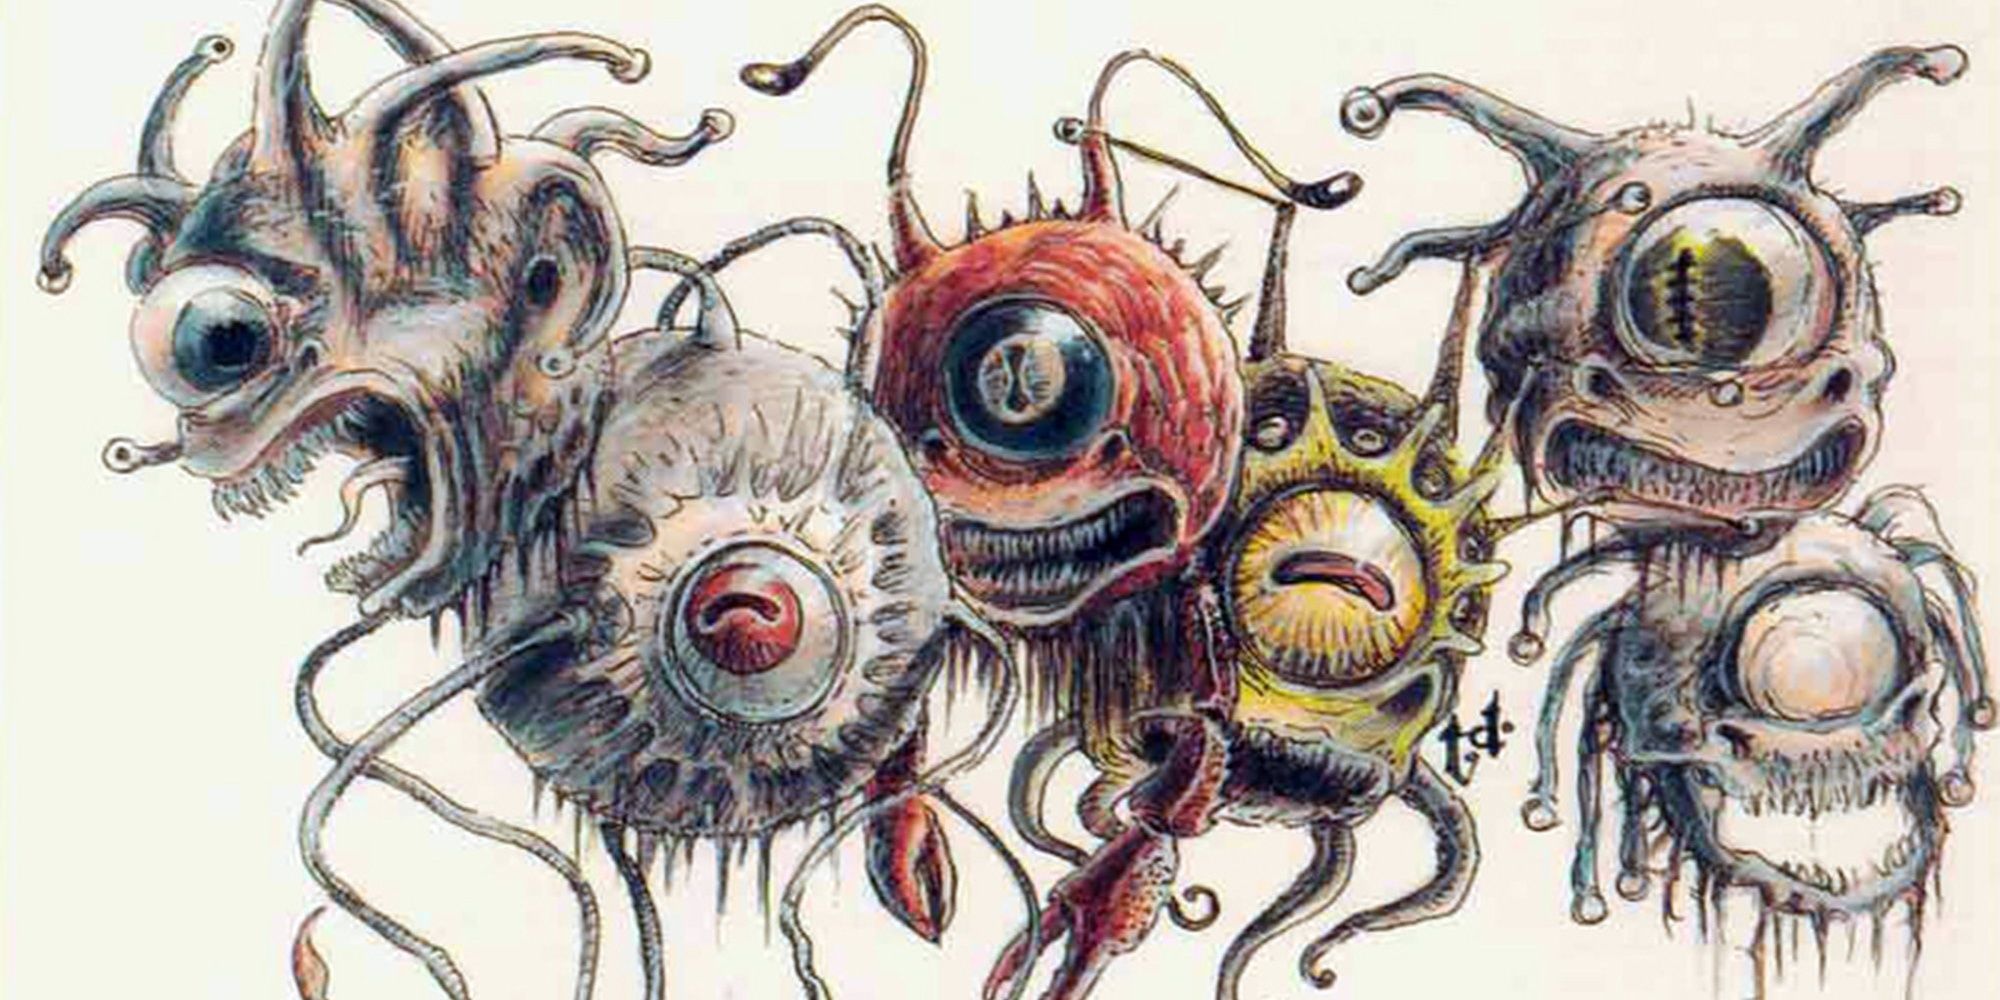 A variety of different Beholders from Dungeons and Dragons